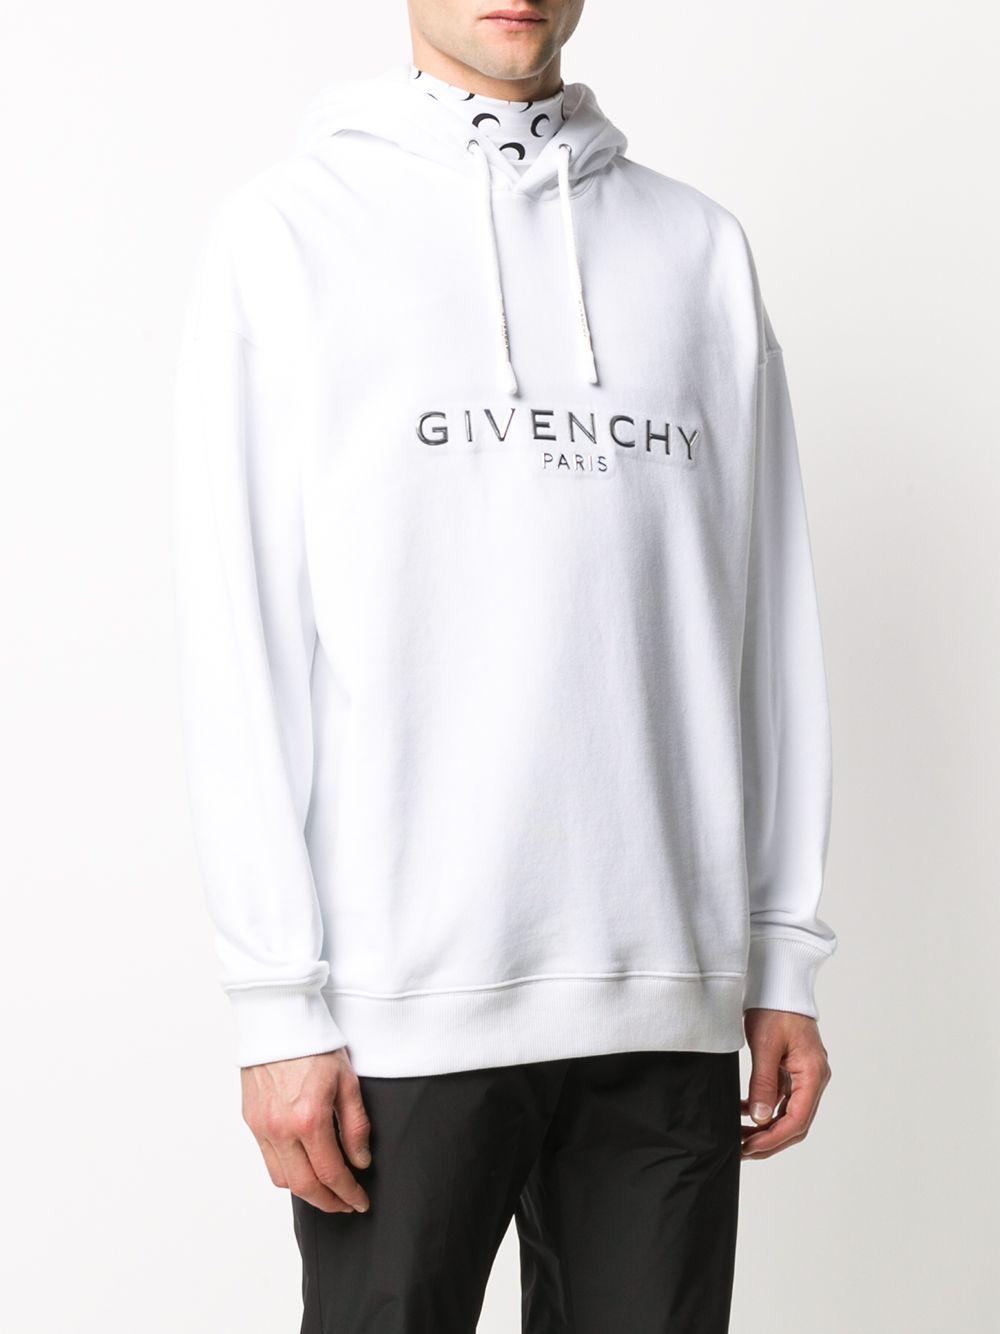 Givenchy Cotton Logo Appliqué Hoodie in White for Men - Lyst